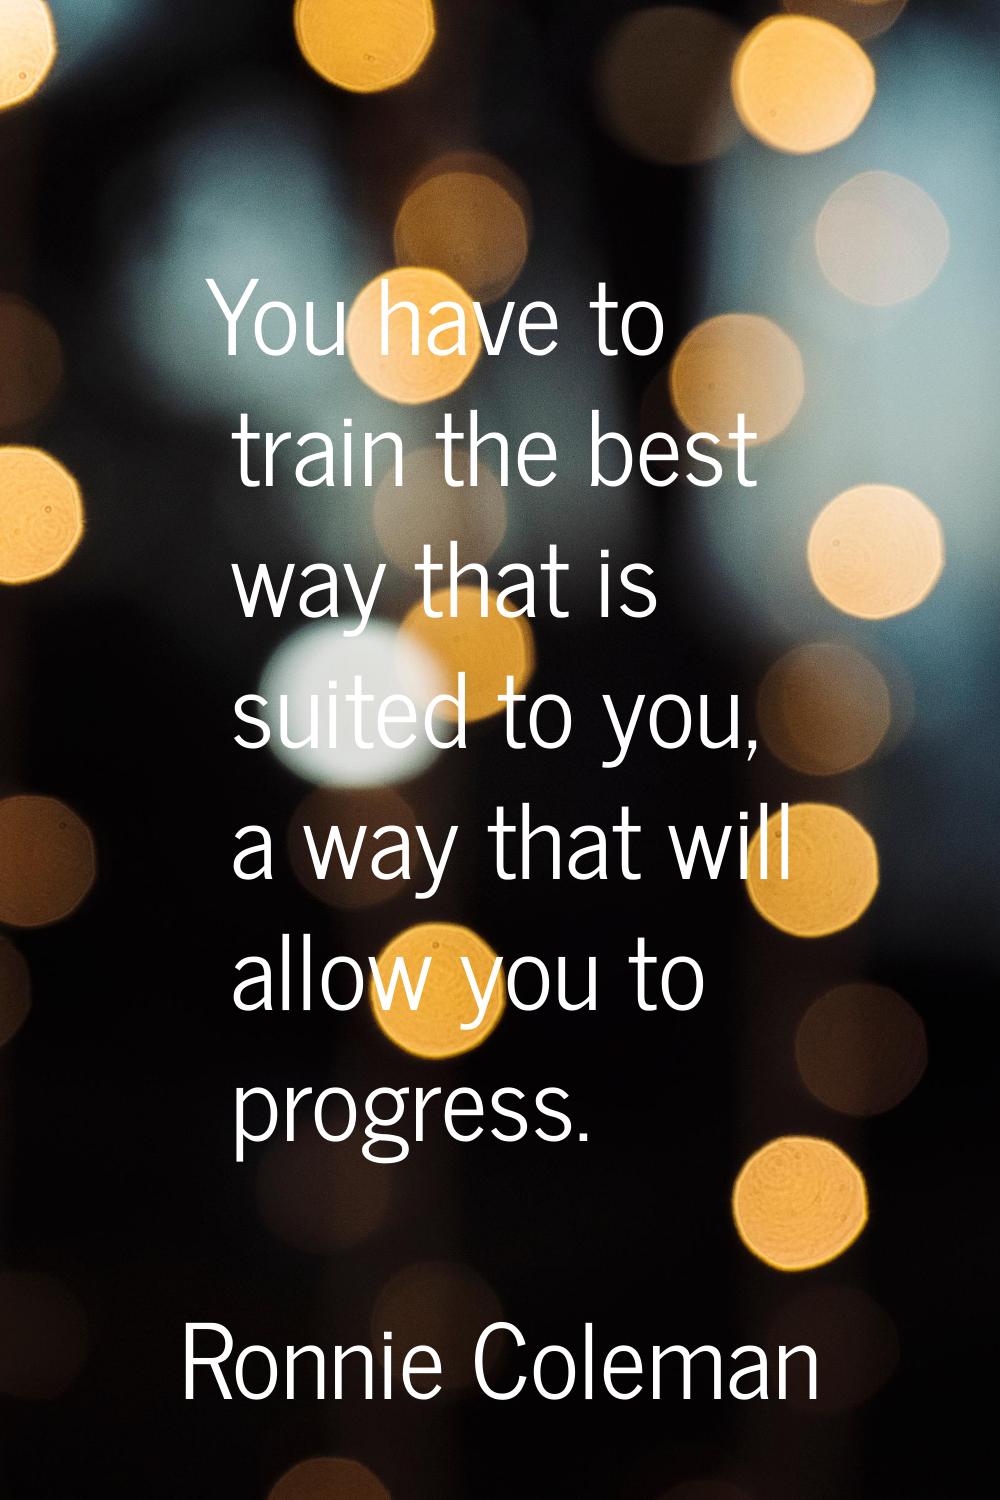 You have to train the best way that is suited to you, a way that will allow you to progress.